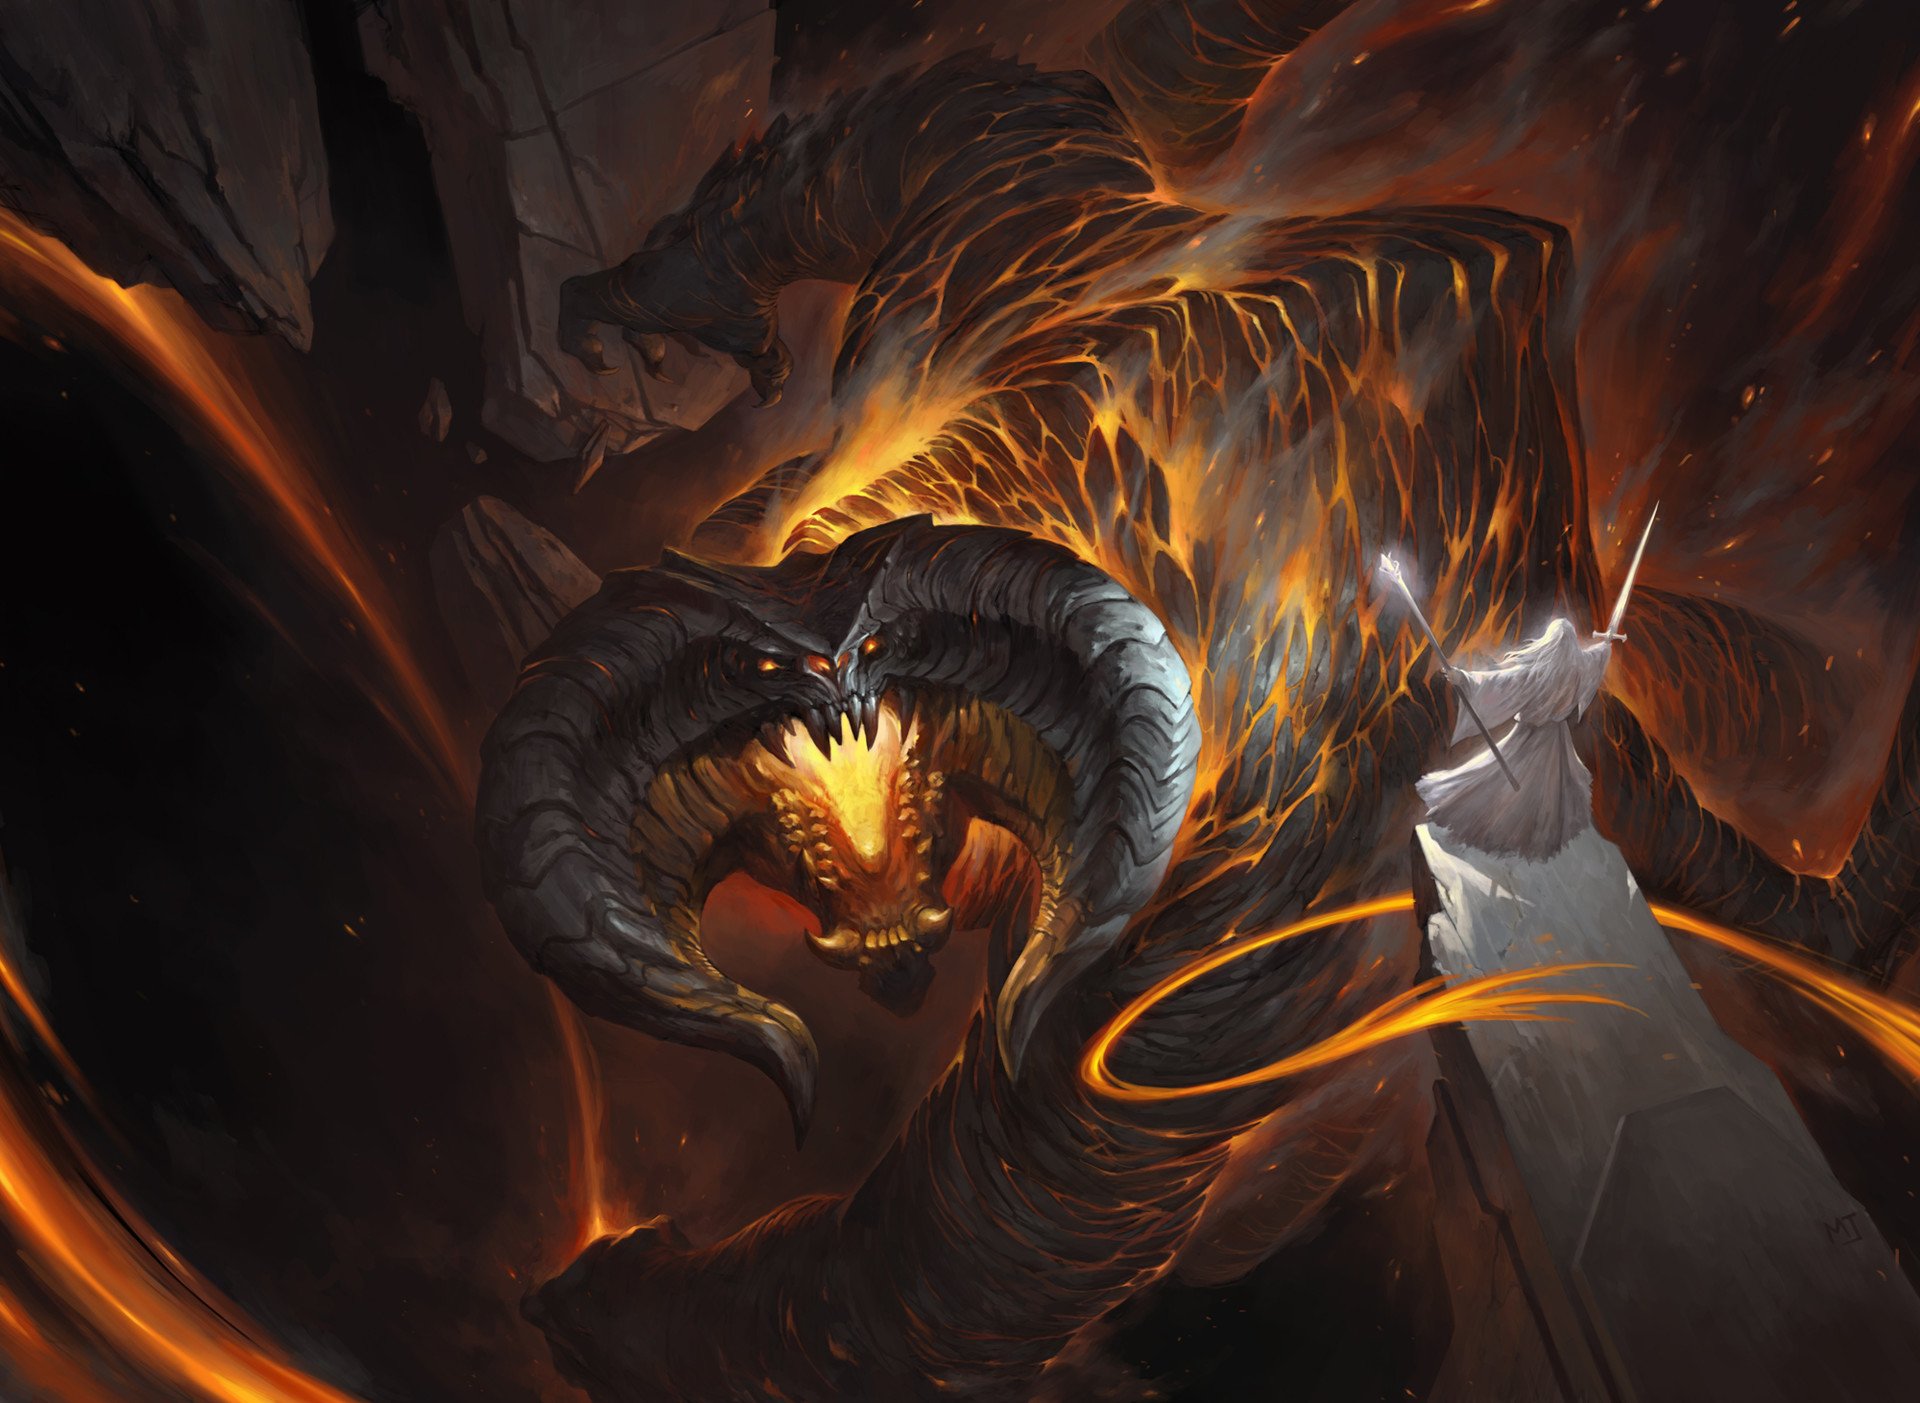 Gandalf Balrog The Lord Of The Rings Artwork Fantasy Art Fictional Character Fictional Creatures 1920x1403